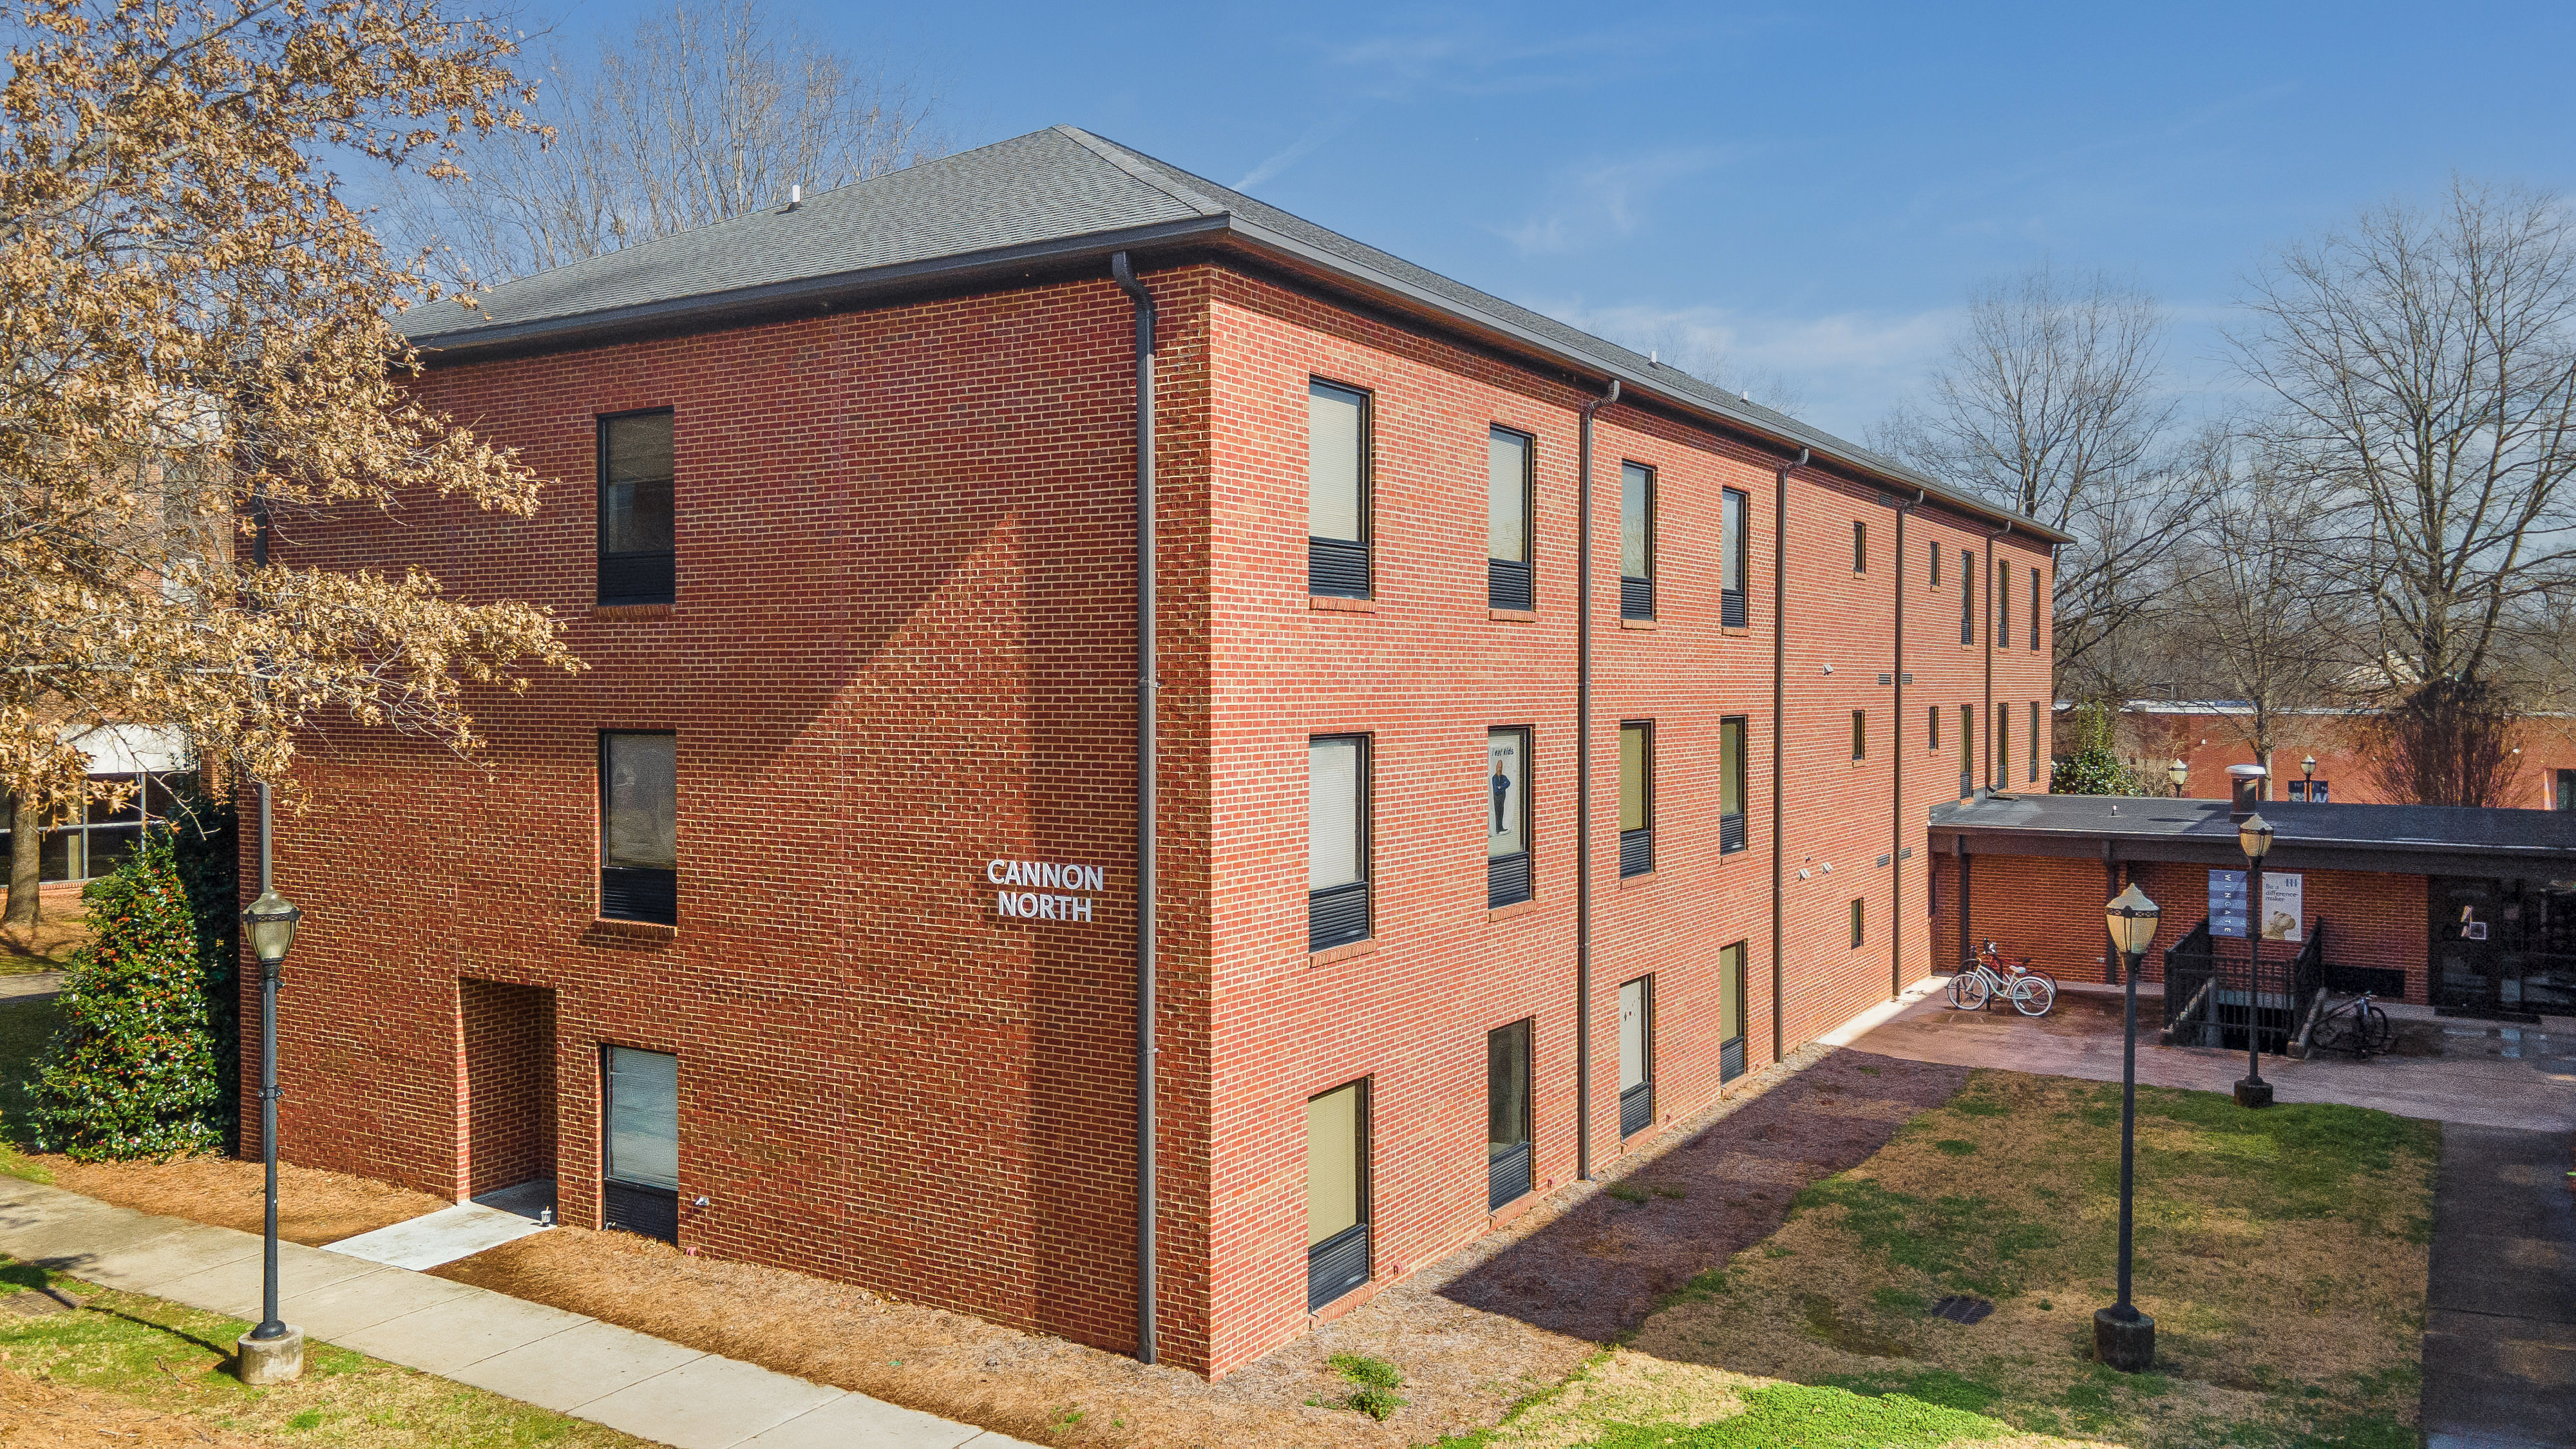 North Cannon Residence Hall